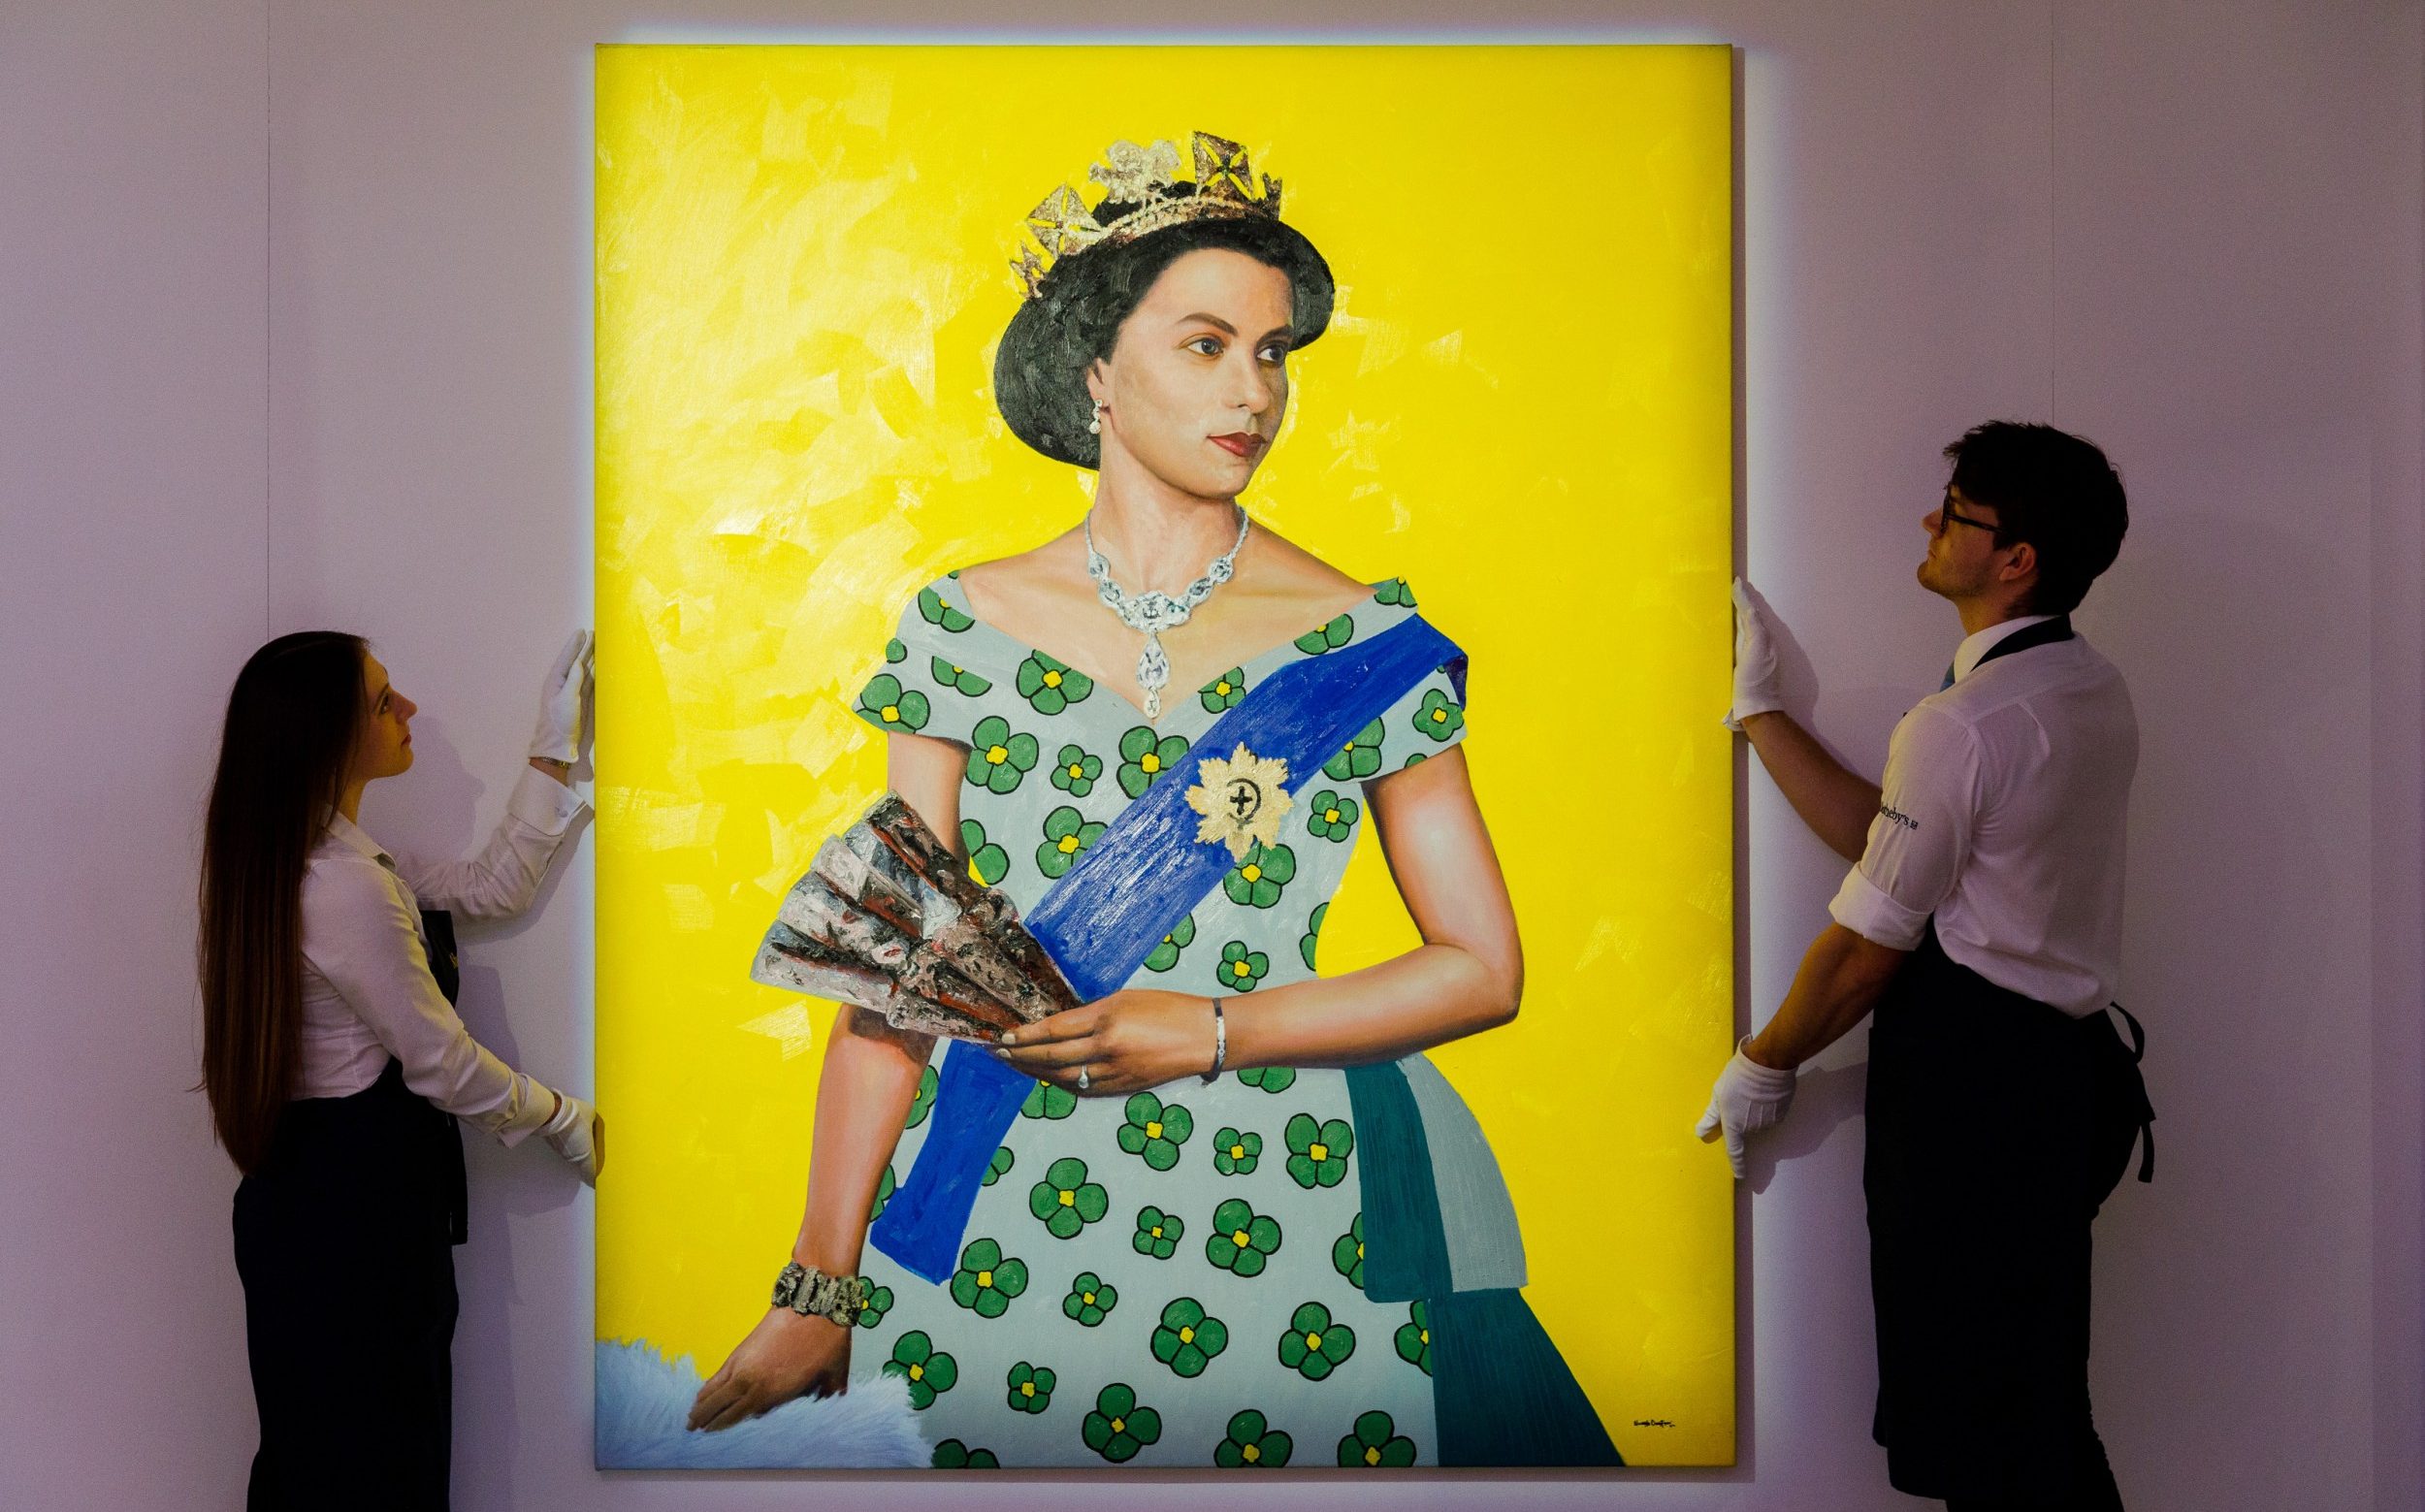 Redefining Portraiture: African Artists Pushing Boundaries | Oluwole Omefemi's portrait of The Queen at Sotheby's © Getty